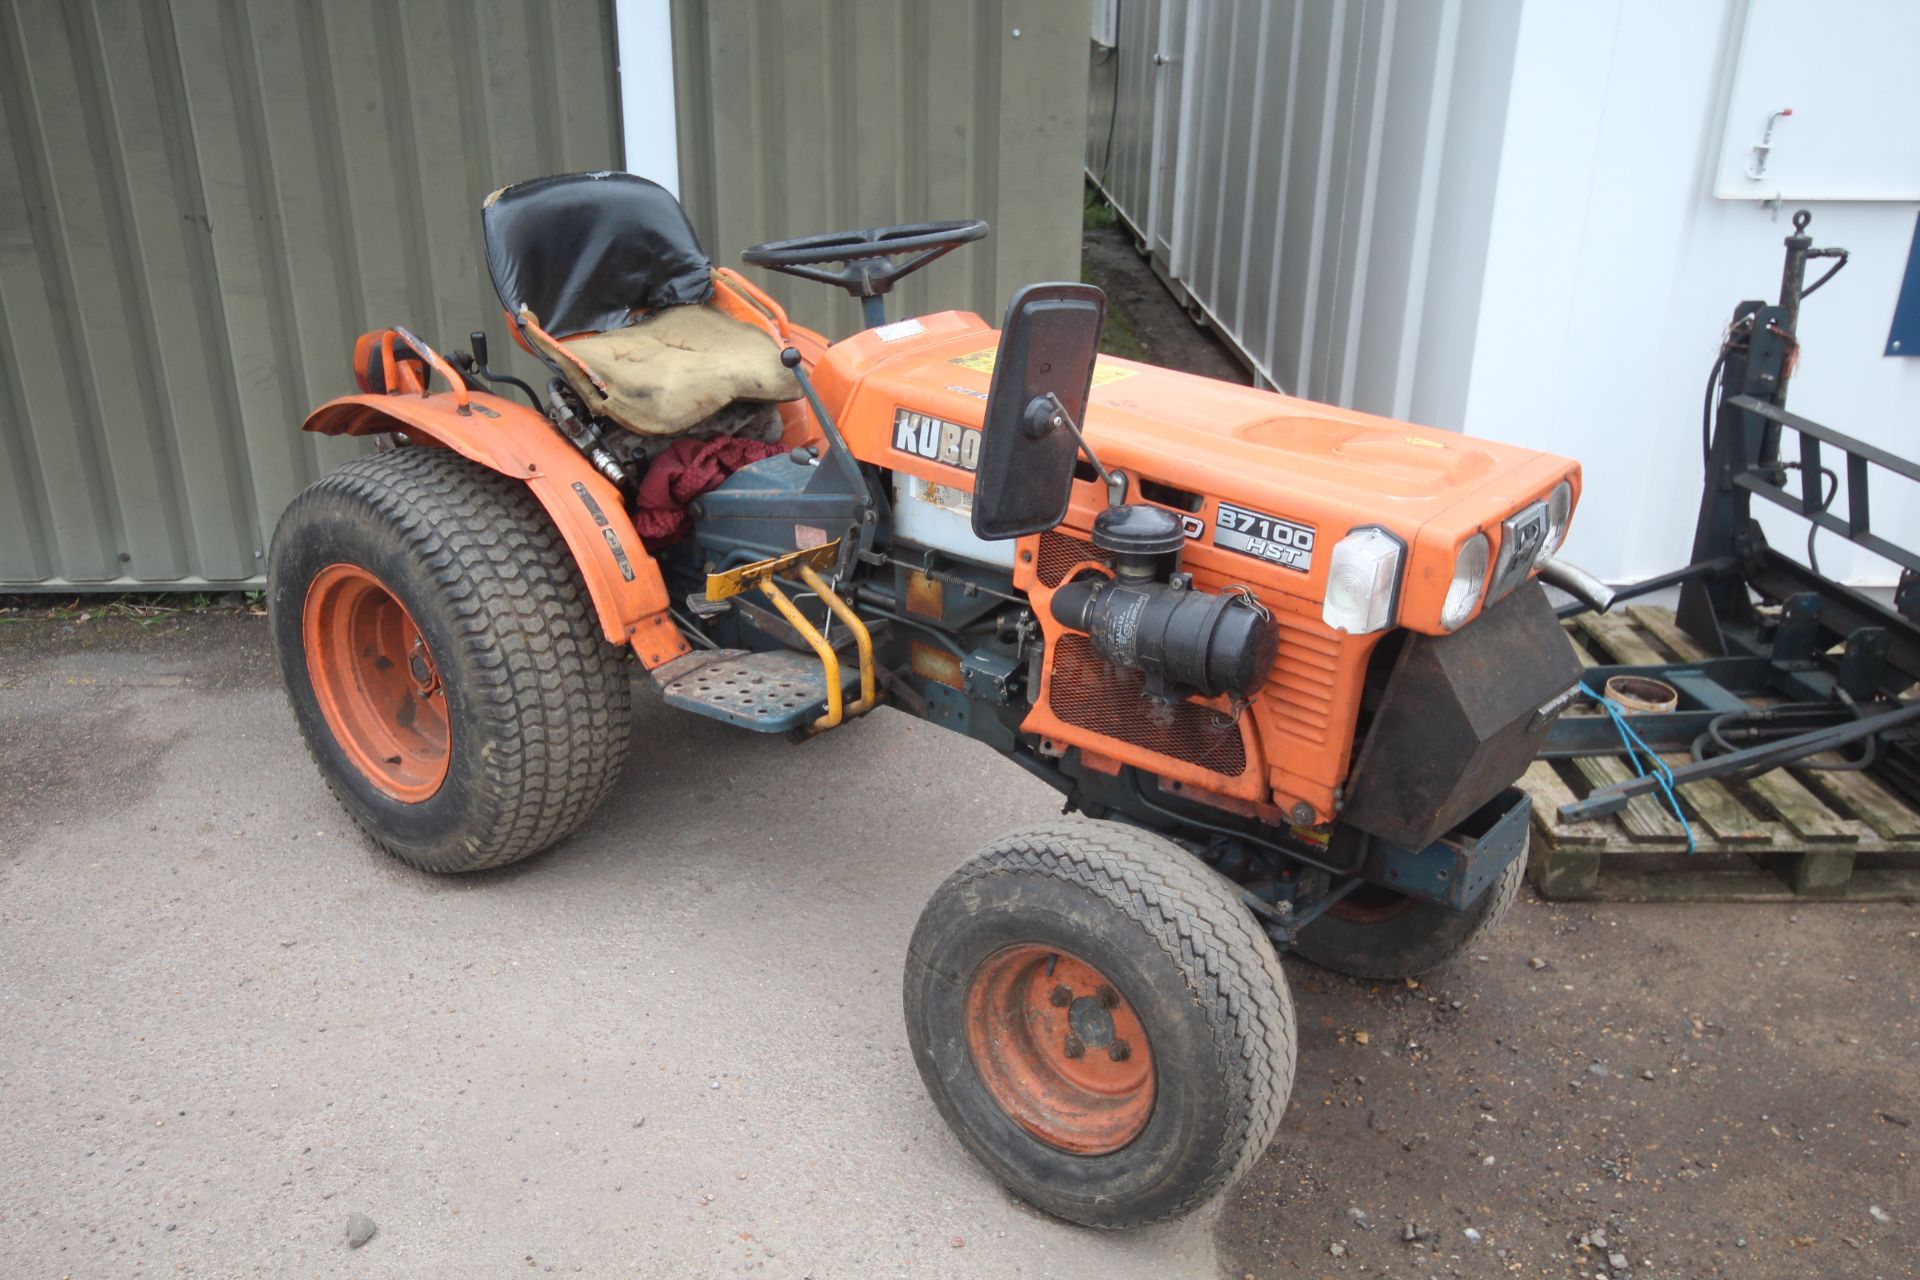 Kubota B7100 HST 4WD compact tractor. 3,134 hours. 29/12.00-15 rear turf wheels and tyres. Front